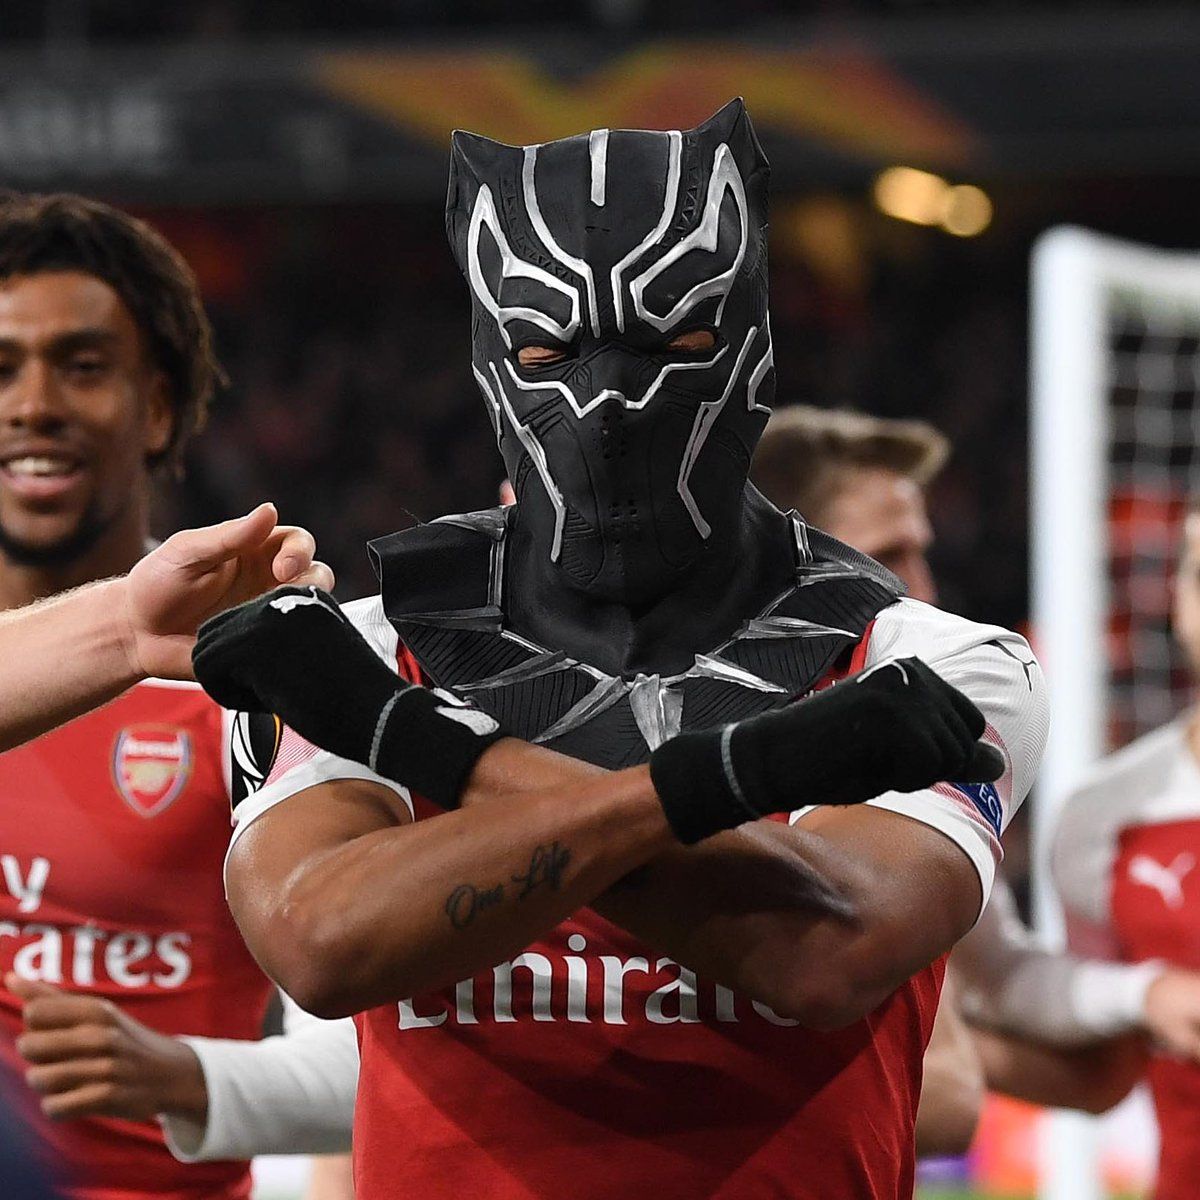 Arsenal needed a mask which represents me. It's